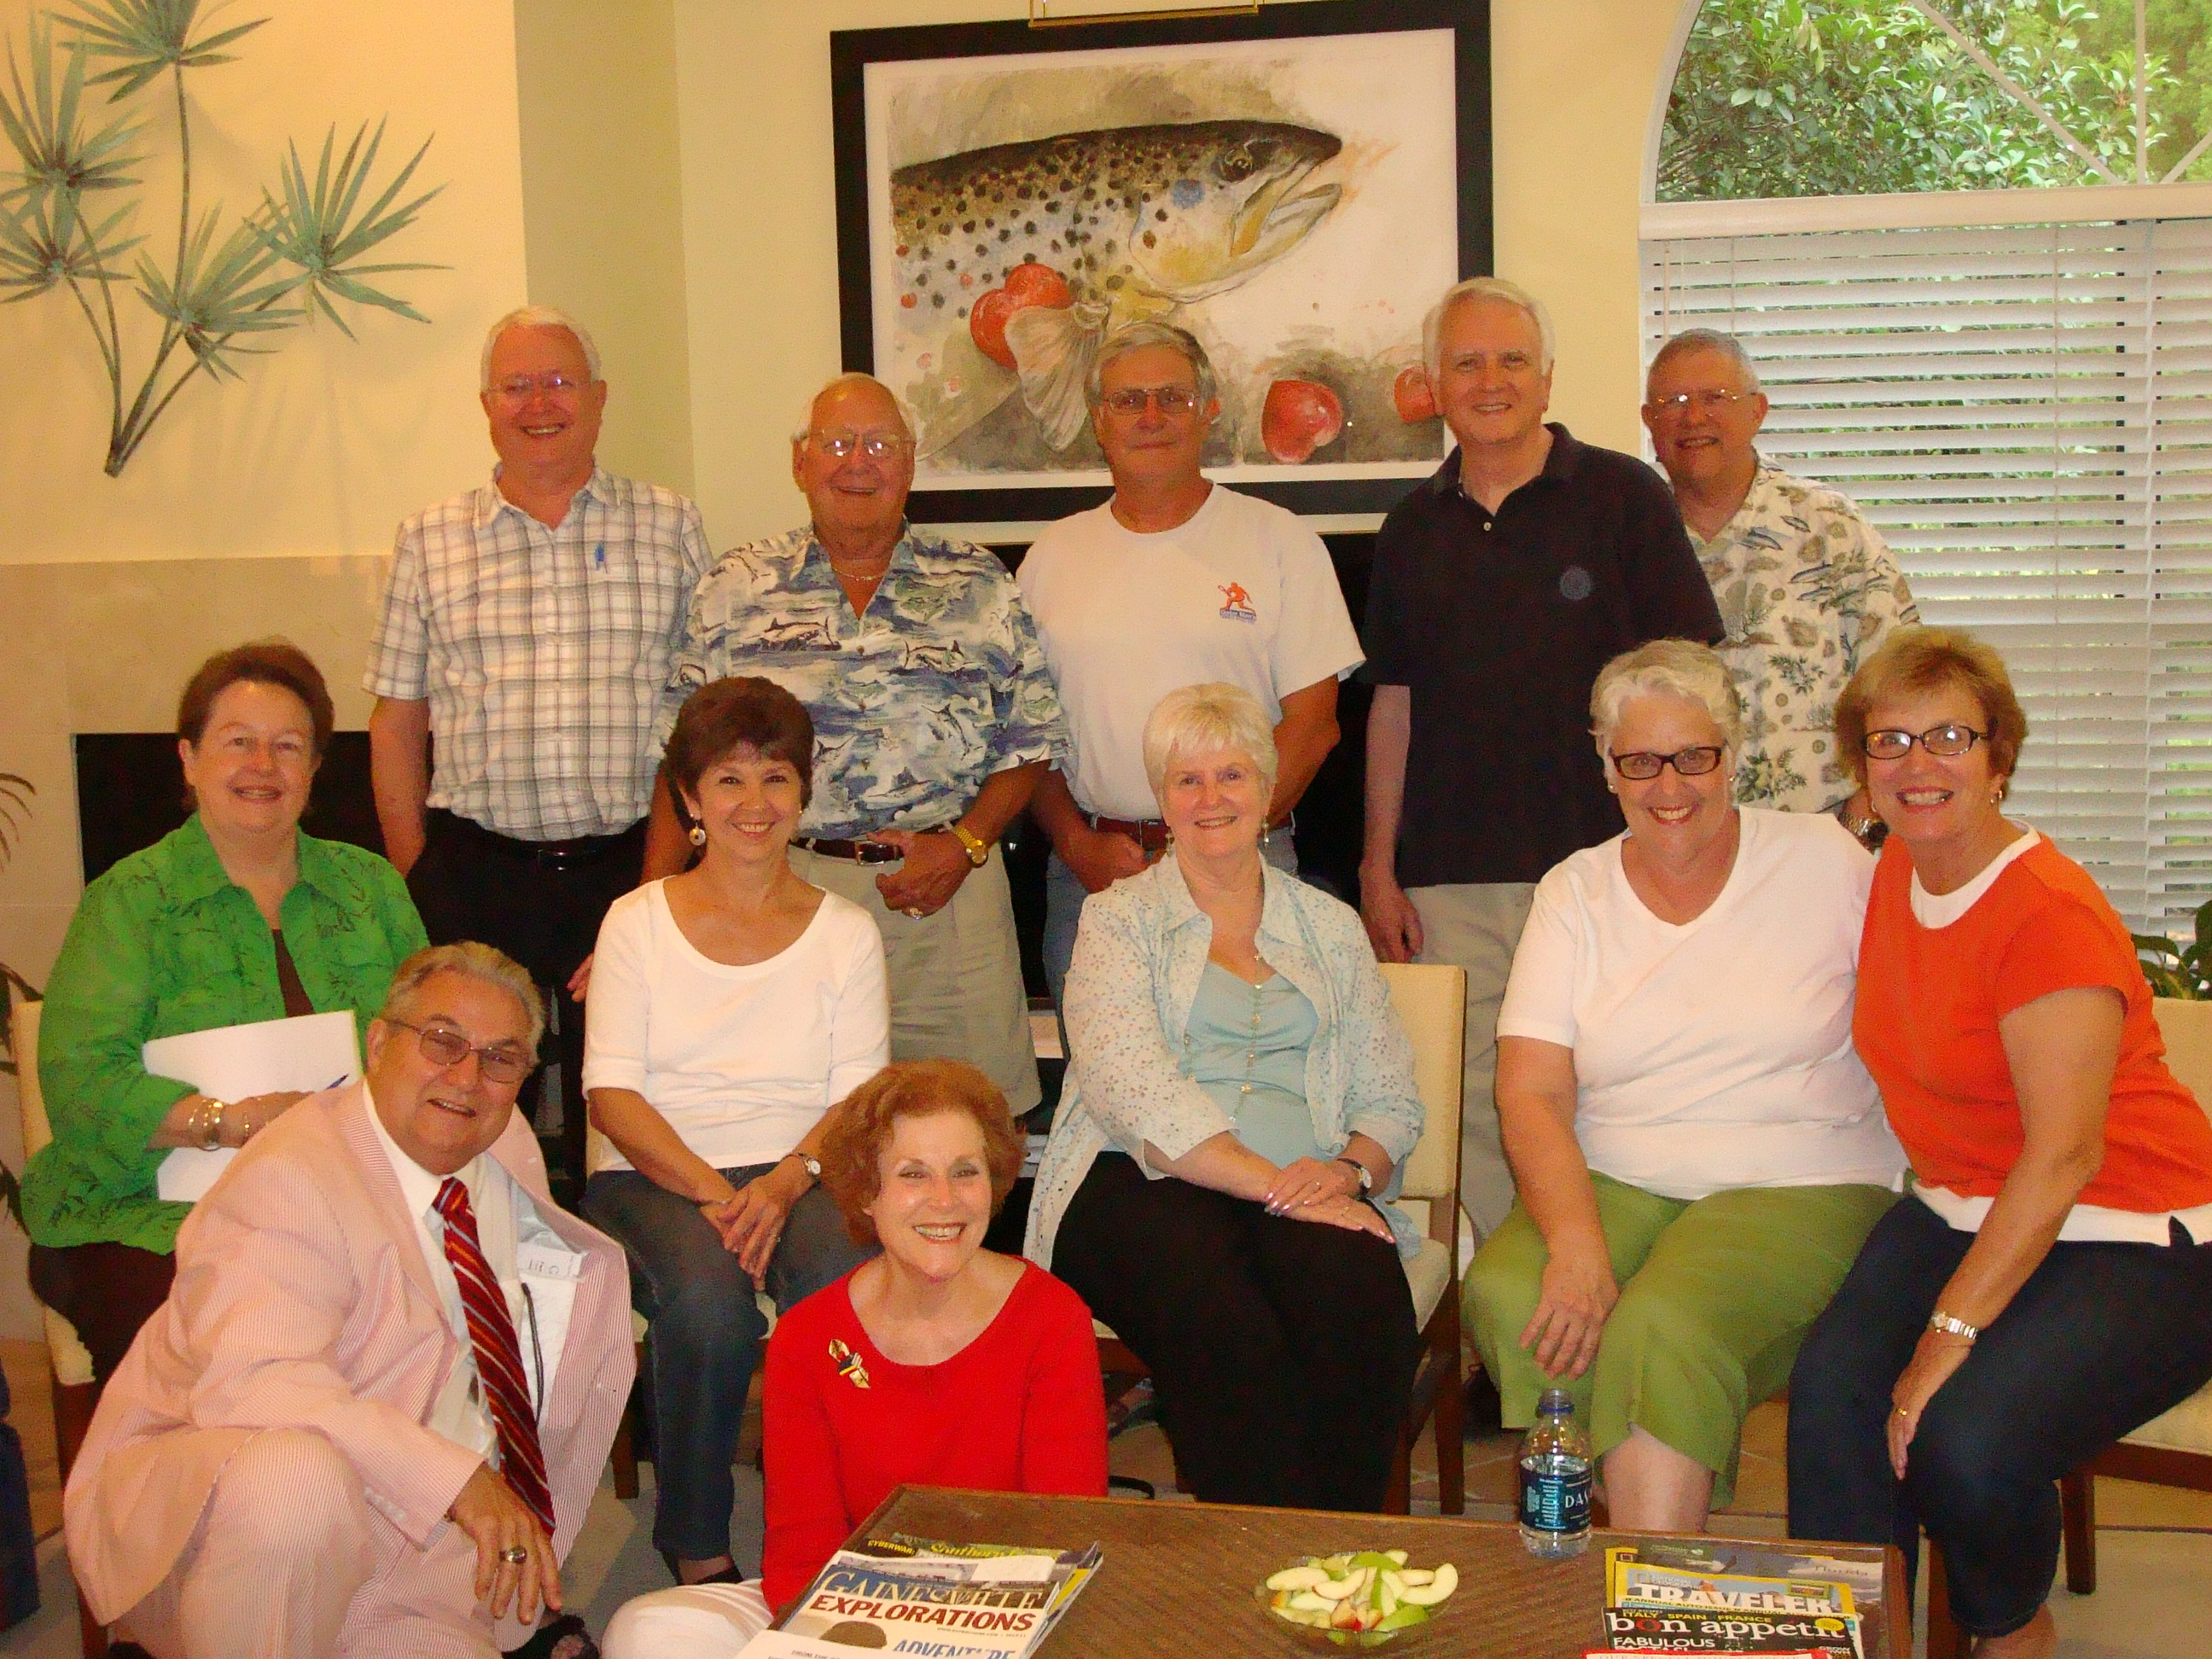 The reunion planning group at our June meeting!
Top, from left:  Adrian Dovell, John Kelly, Bob Guinn, George Tubb, Robert Hester.
Middle:  Kit Macdonald, Karen Owens, Jeanne Dorsey, Mimi Carr, Marilyn Tubb.
Front:  Kenny Matheny, Beth Boyles.